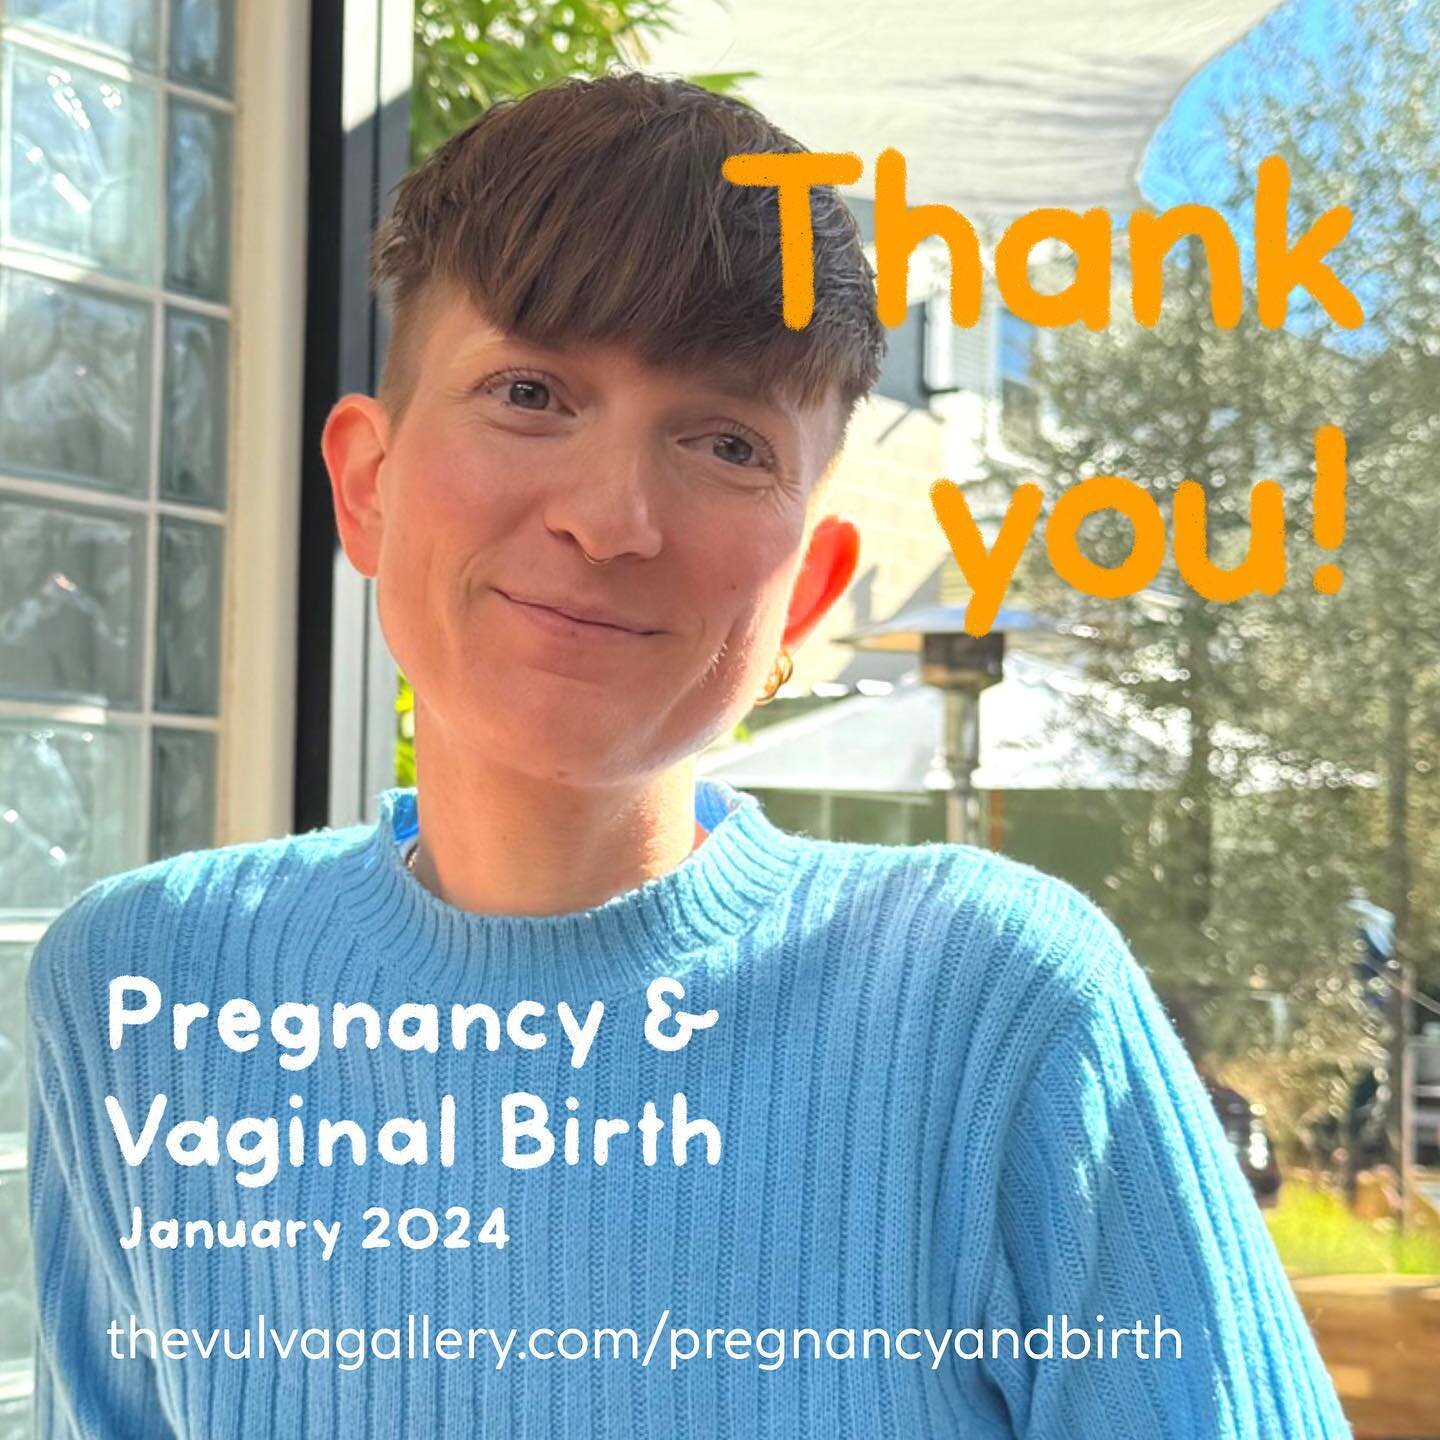 ✨ THANK YOU! ✨ January&rsquo;s Pregnancy and Vaginal Birth month was a blast. I&rsquo;ve shared a bunch of anatomy illustrations and with the help of 14 health professionals we answered a lot of your questions. 

The month flew by much faster than I 